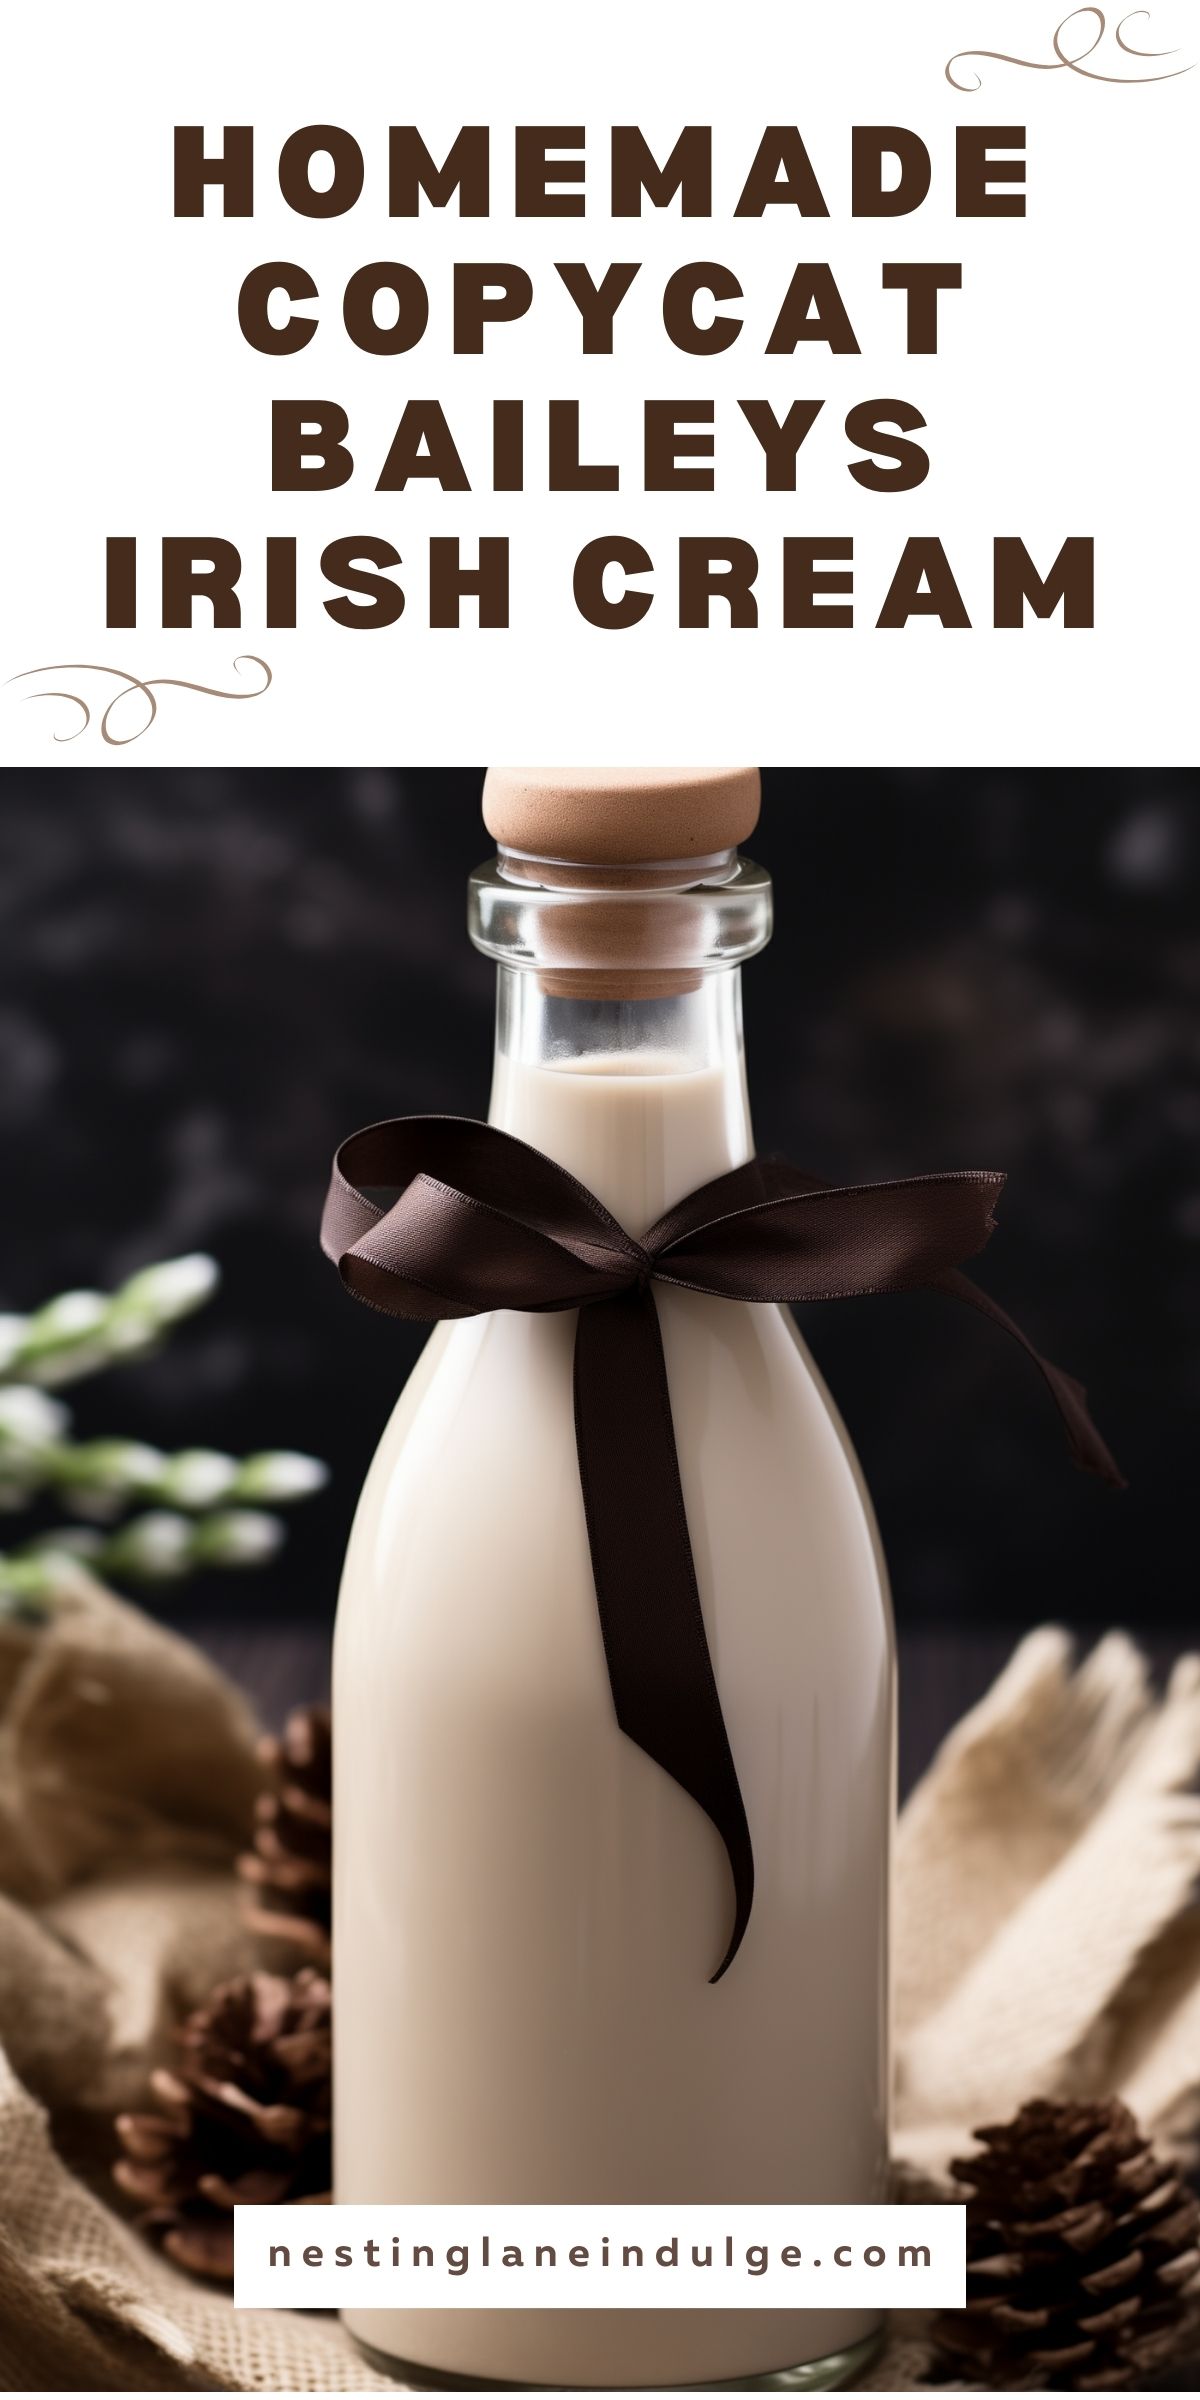 A promotional image for homemade copycat Baileys Irish Cream featuring a bottle with a dark brown ribbon against a rustic backdrop. The top of the image has large text reading 'Homemade Copycat Baileys Irish Cream' and the bottom includes the website 'nestinglaneindulge.com'.